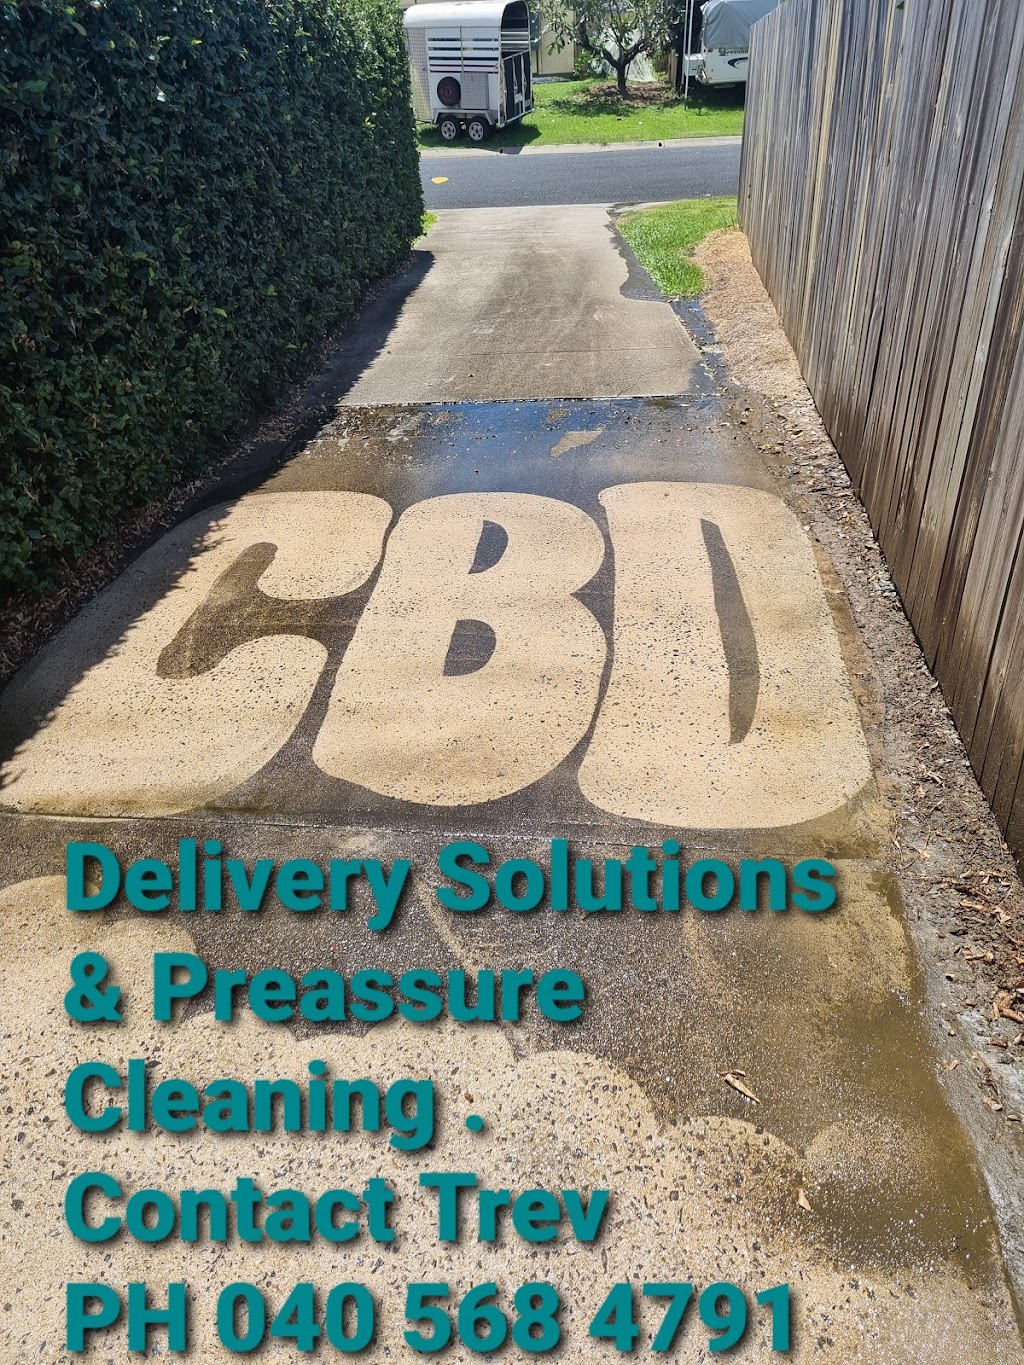 CBD DELIVERY SOLUTIONS AND PREASSURE SERVICES | general contractor | 29 McBride St, Redlynch QLD 4870, Australia | 0405684791 OR +61 405 684 791